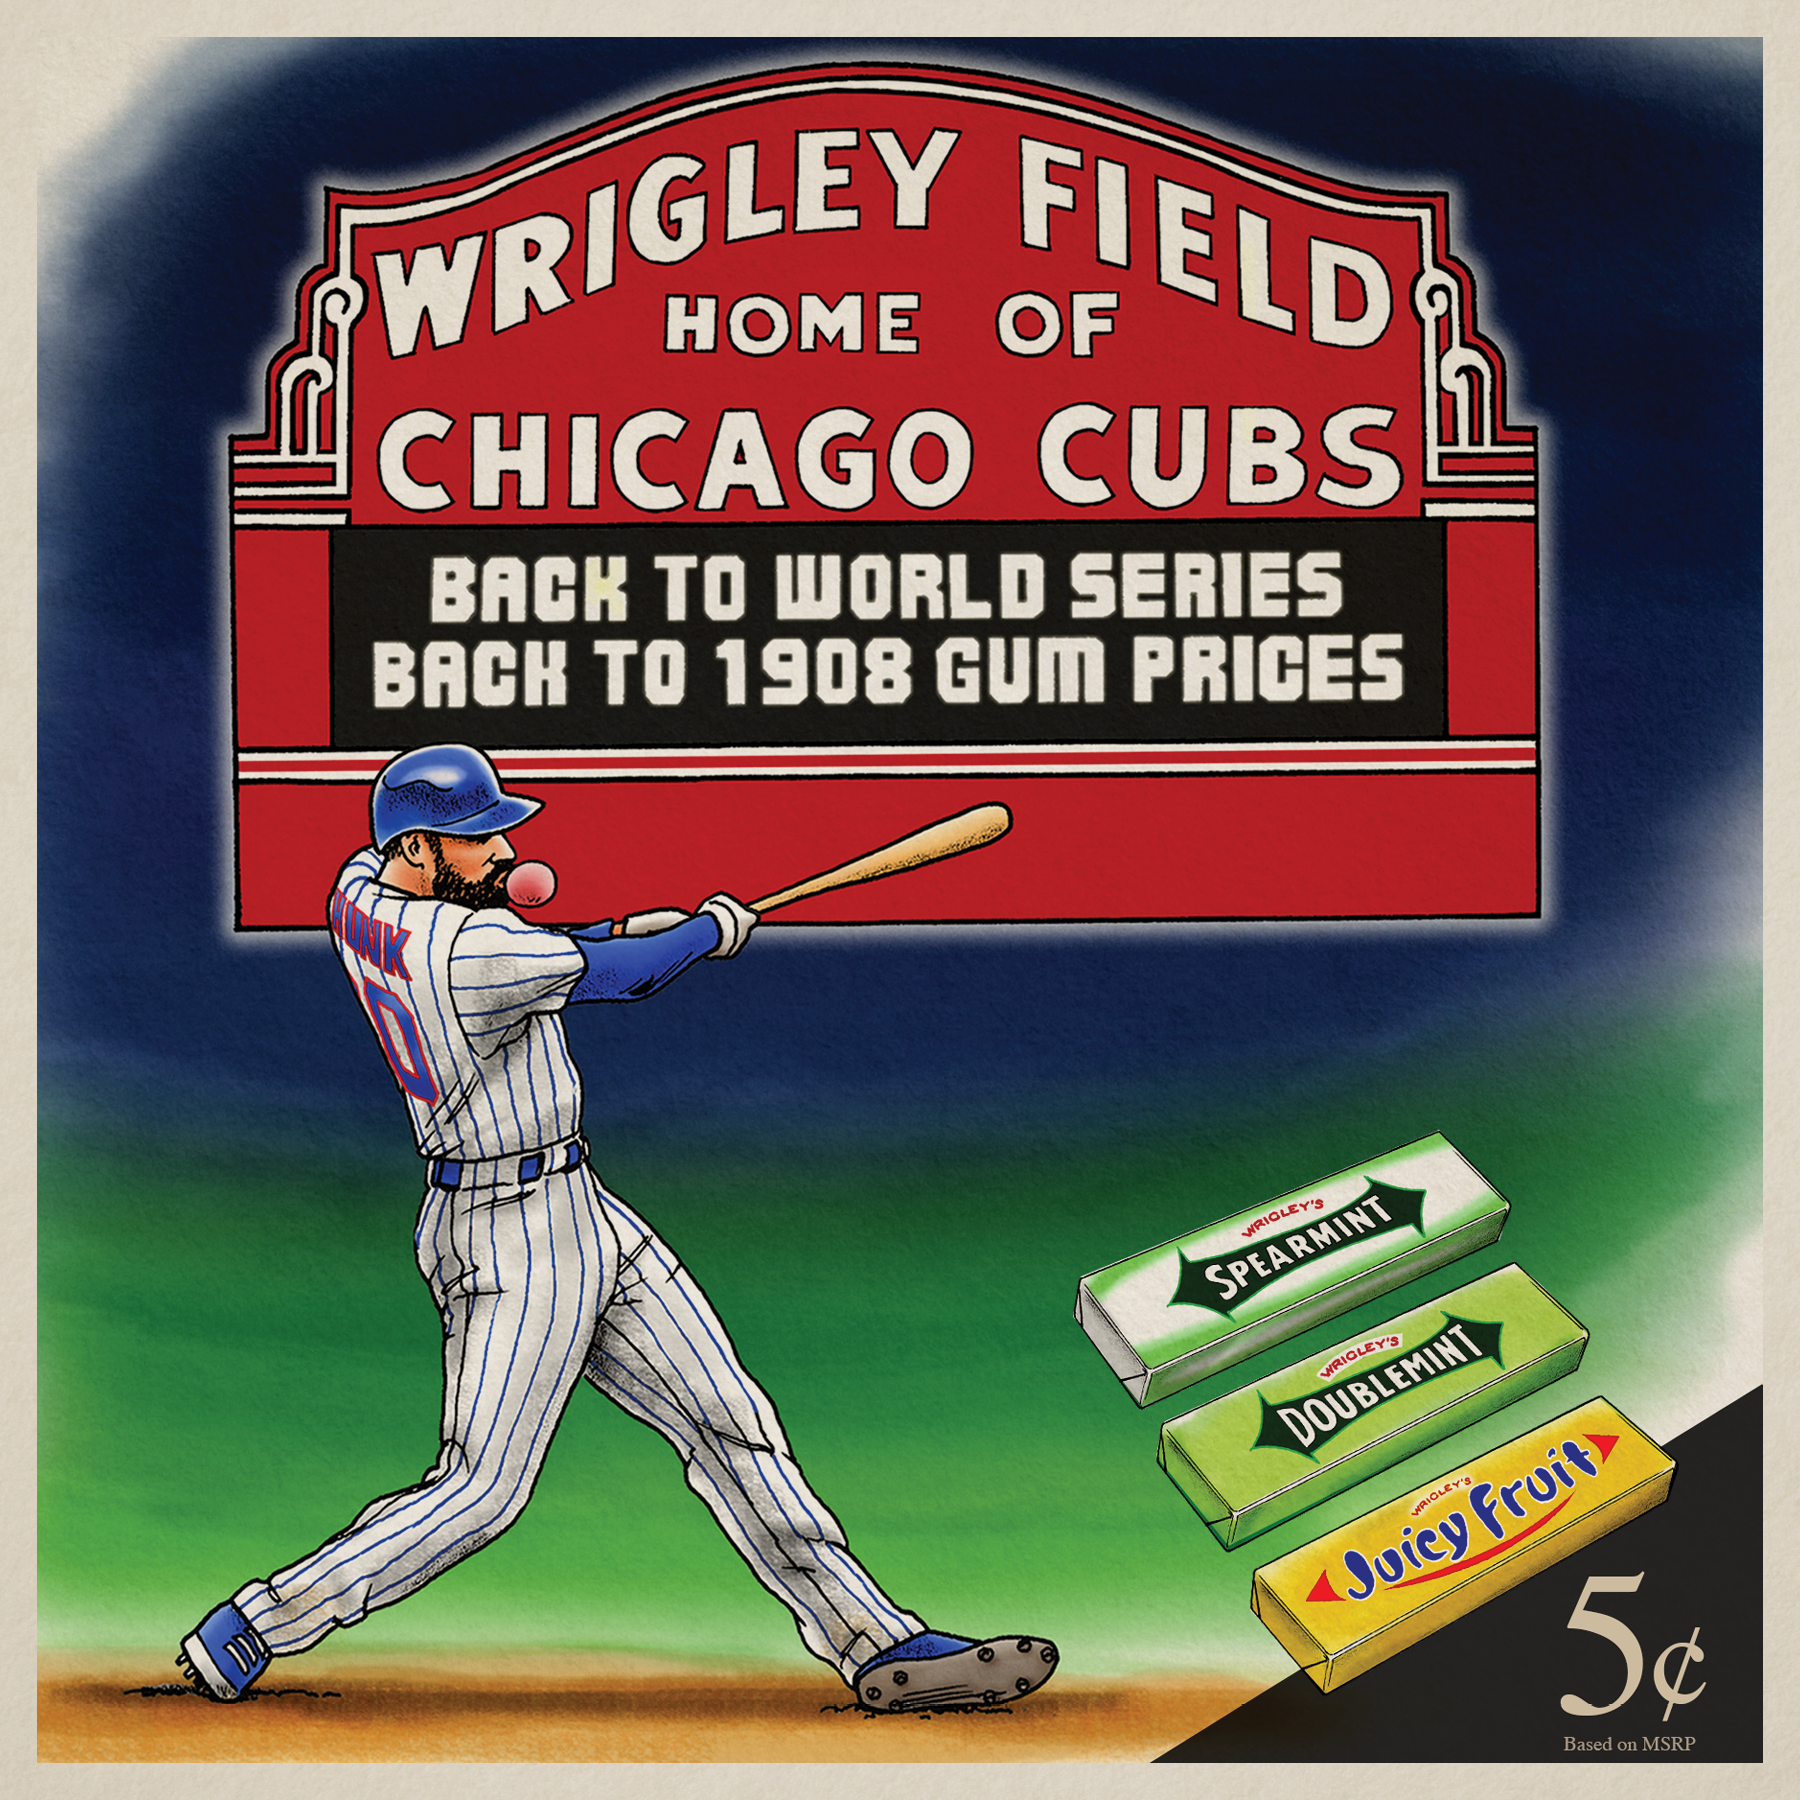 Wrigley Gum Selling For 1908 Price, Ignoring History Of Chicago Cubs & Wrigley Field